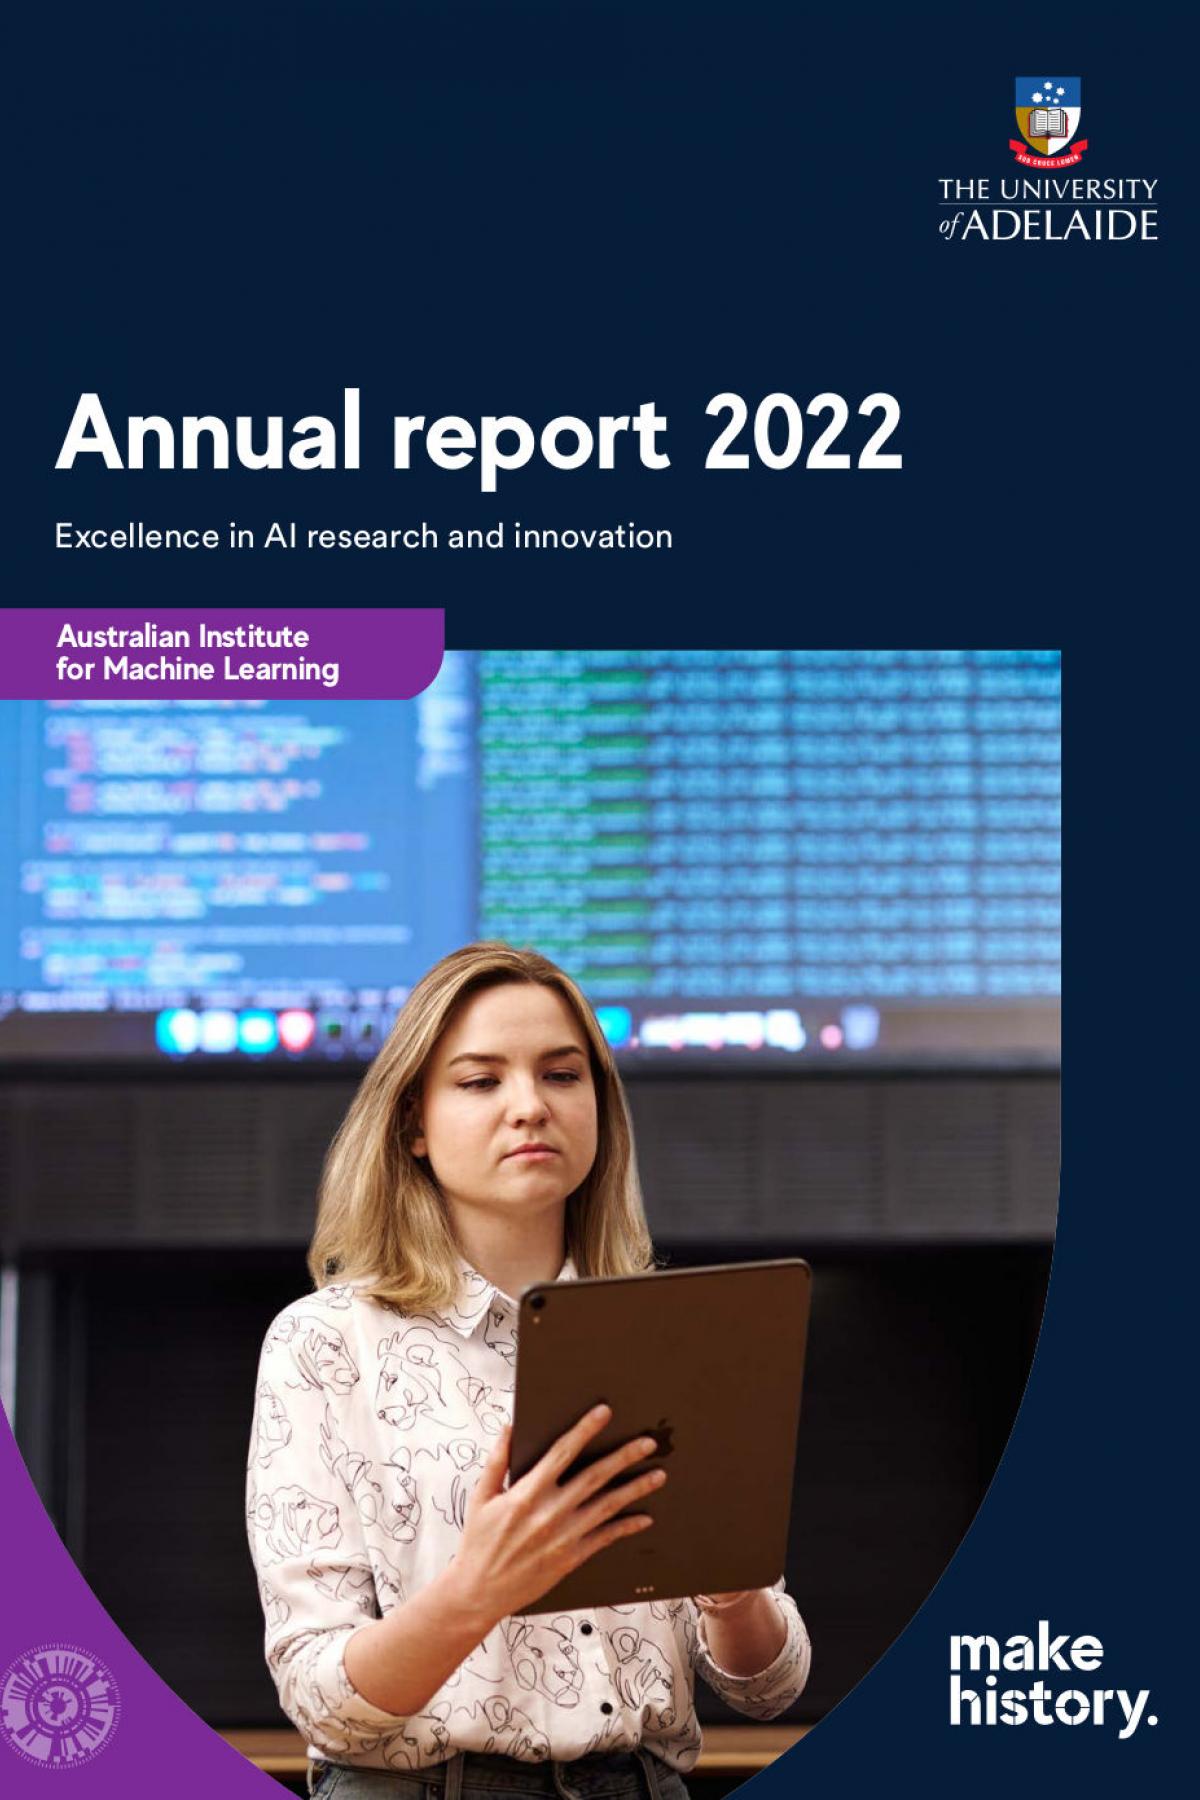 AIML annual report cover, shows young woman with ipad, with screen of computer code behind her